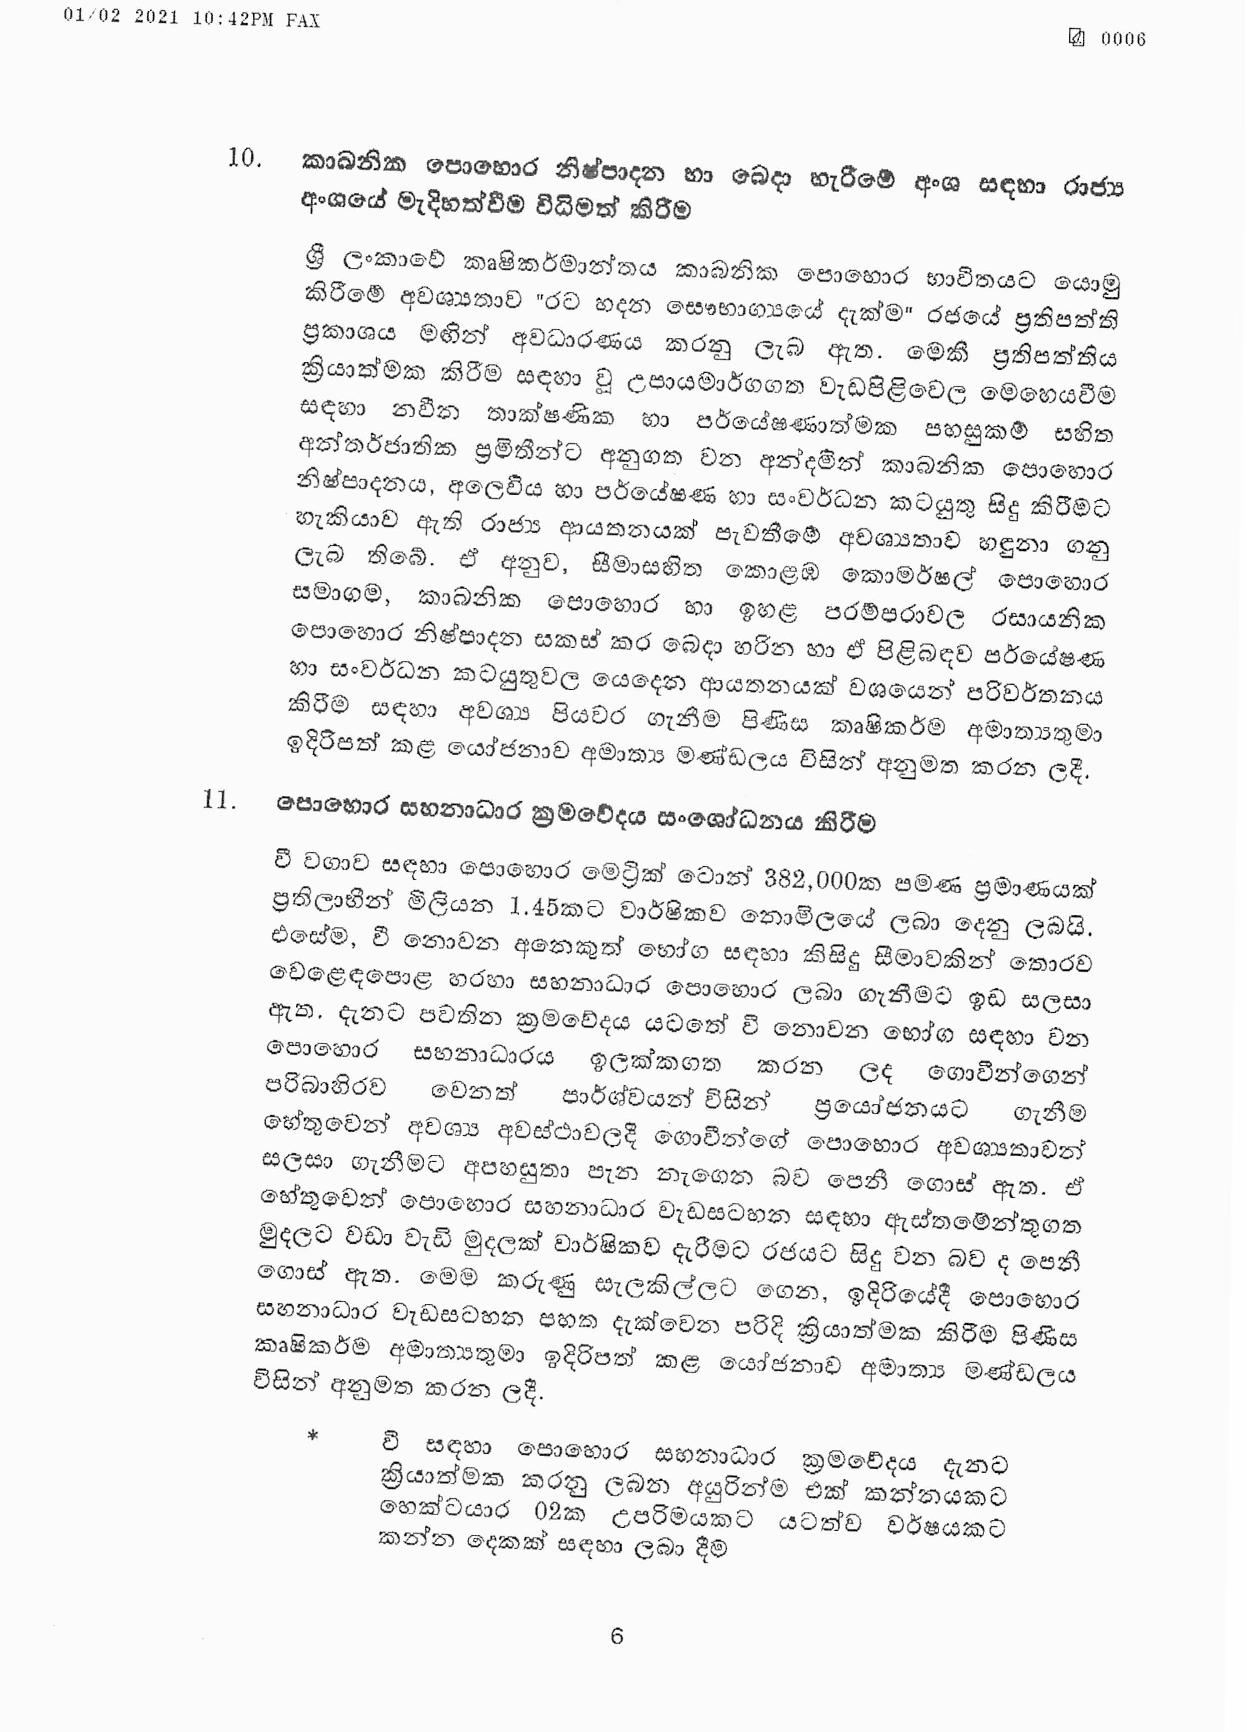 Cabinet Decision on 01.02.2021 page 006